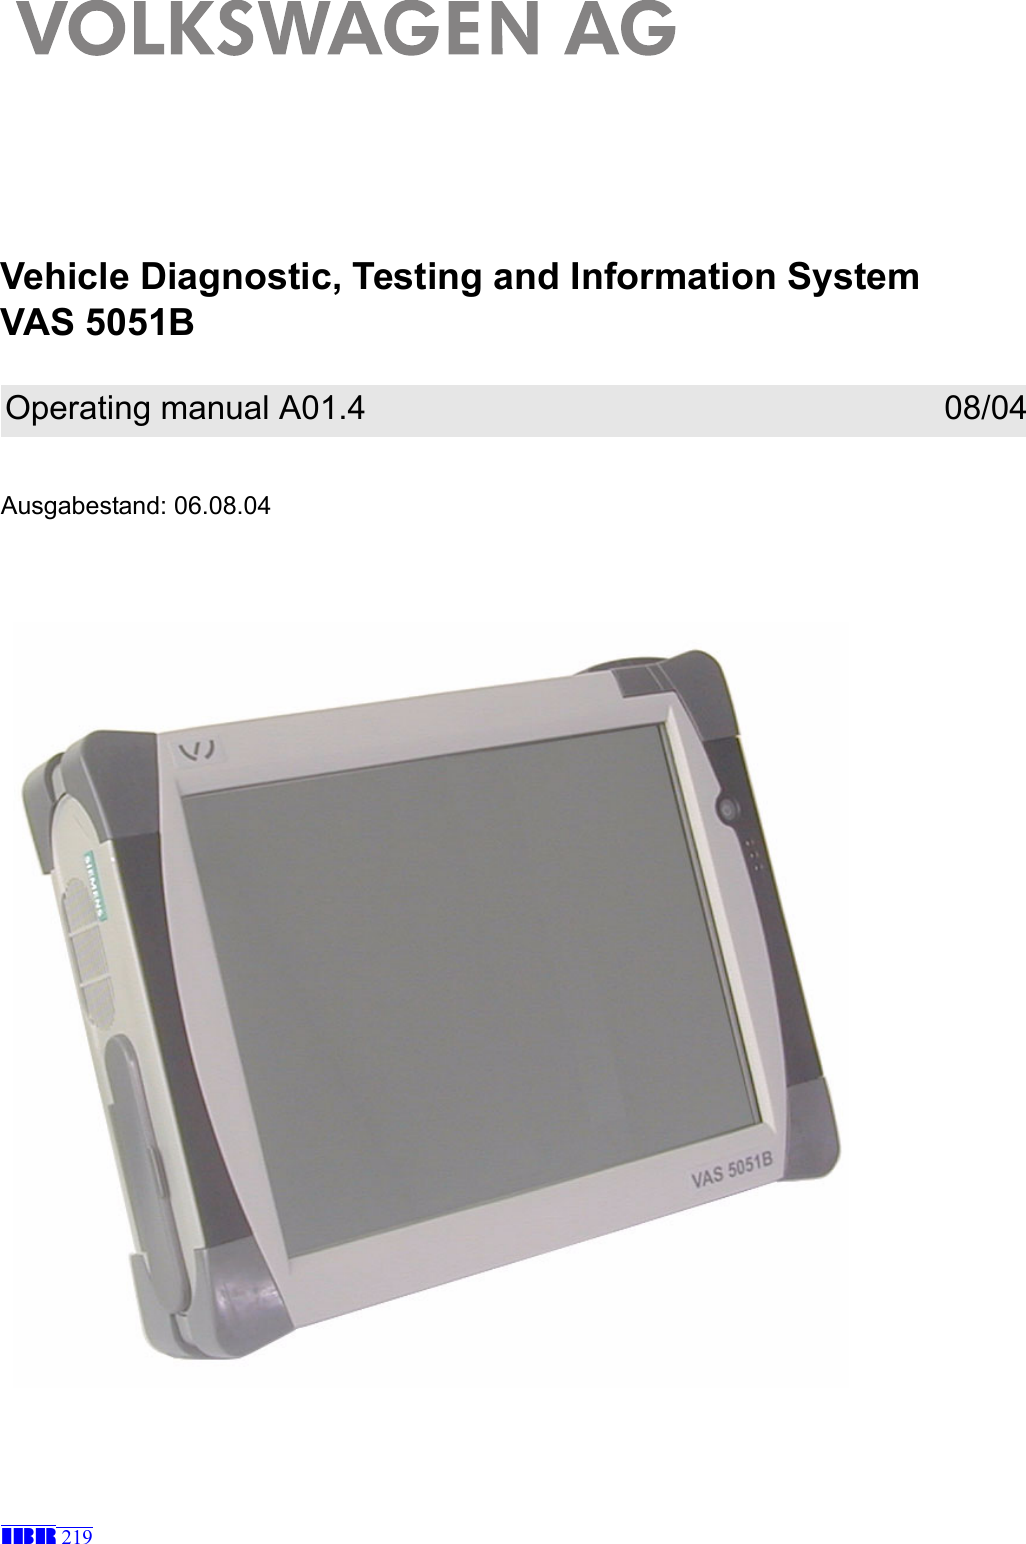 Vehicle Diagnostic, Testing and Information SystemVAS 5051BAusgabestand: 06.08.04Operating manual A01.4 08/04IBR 219